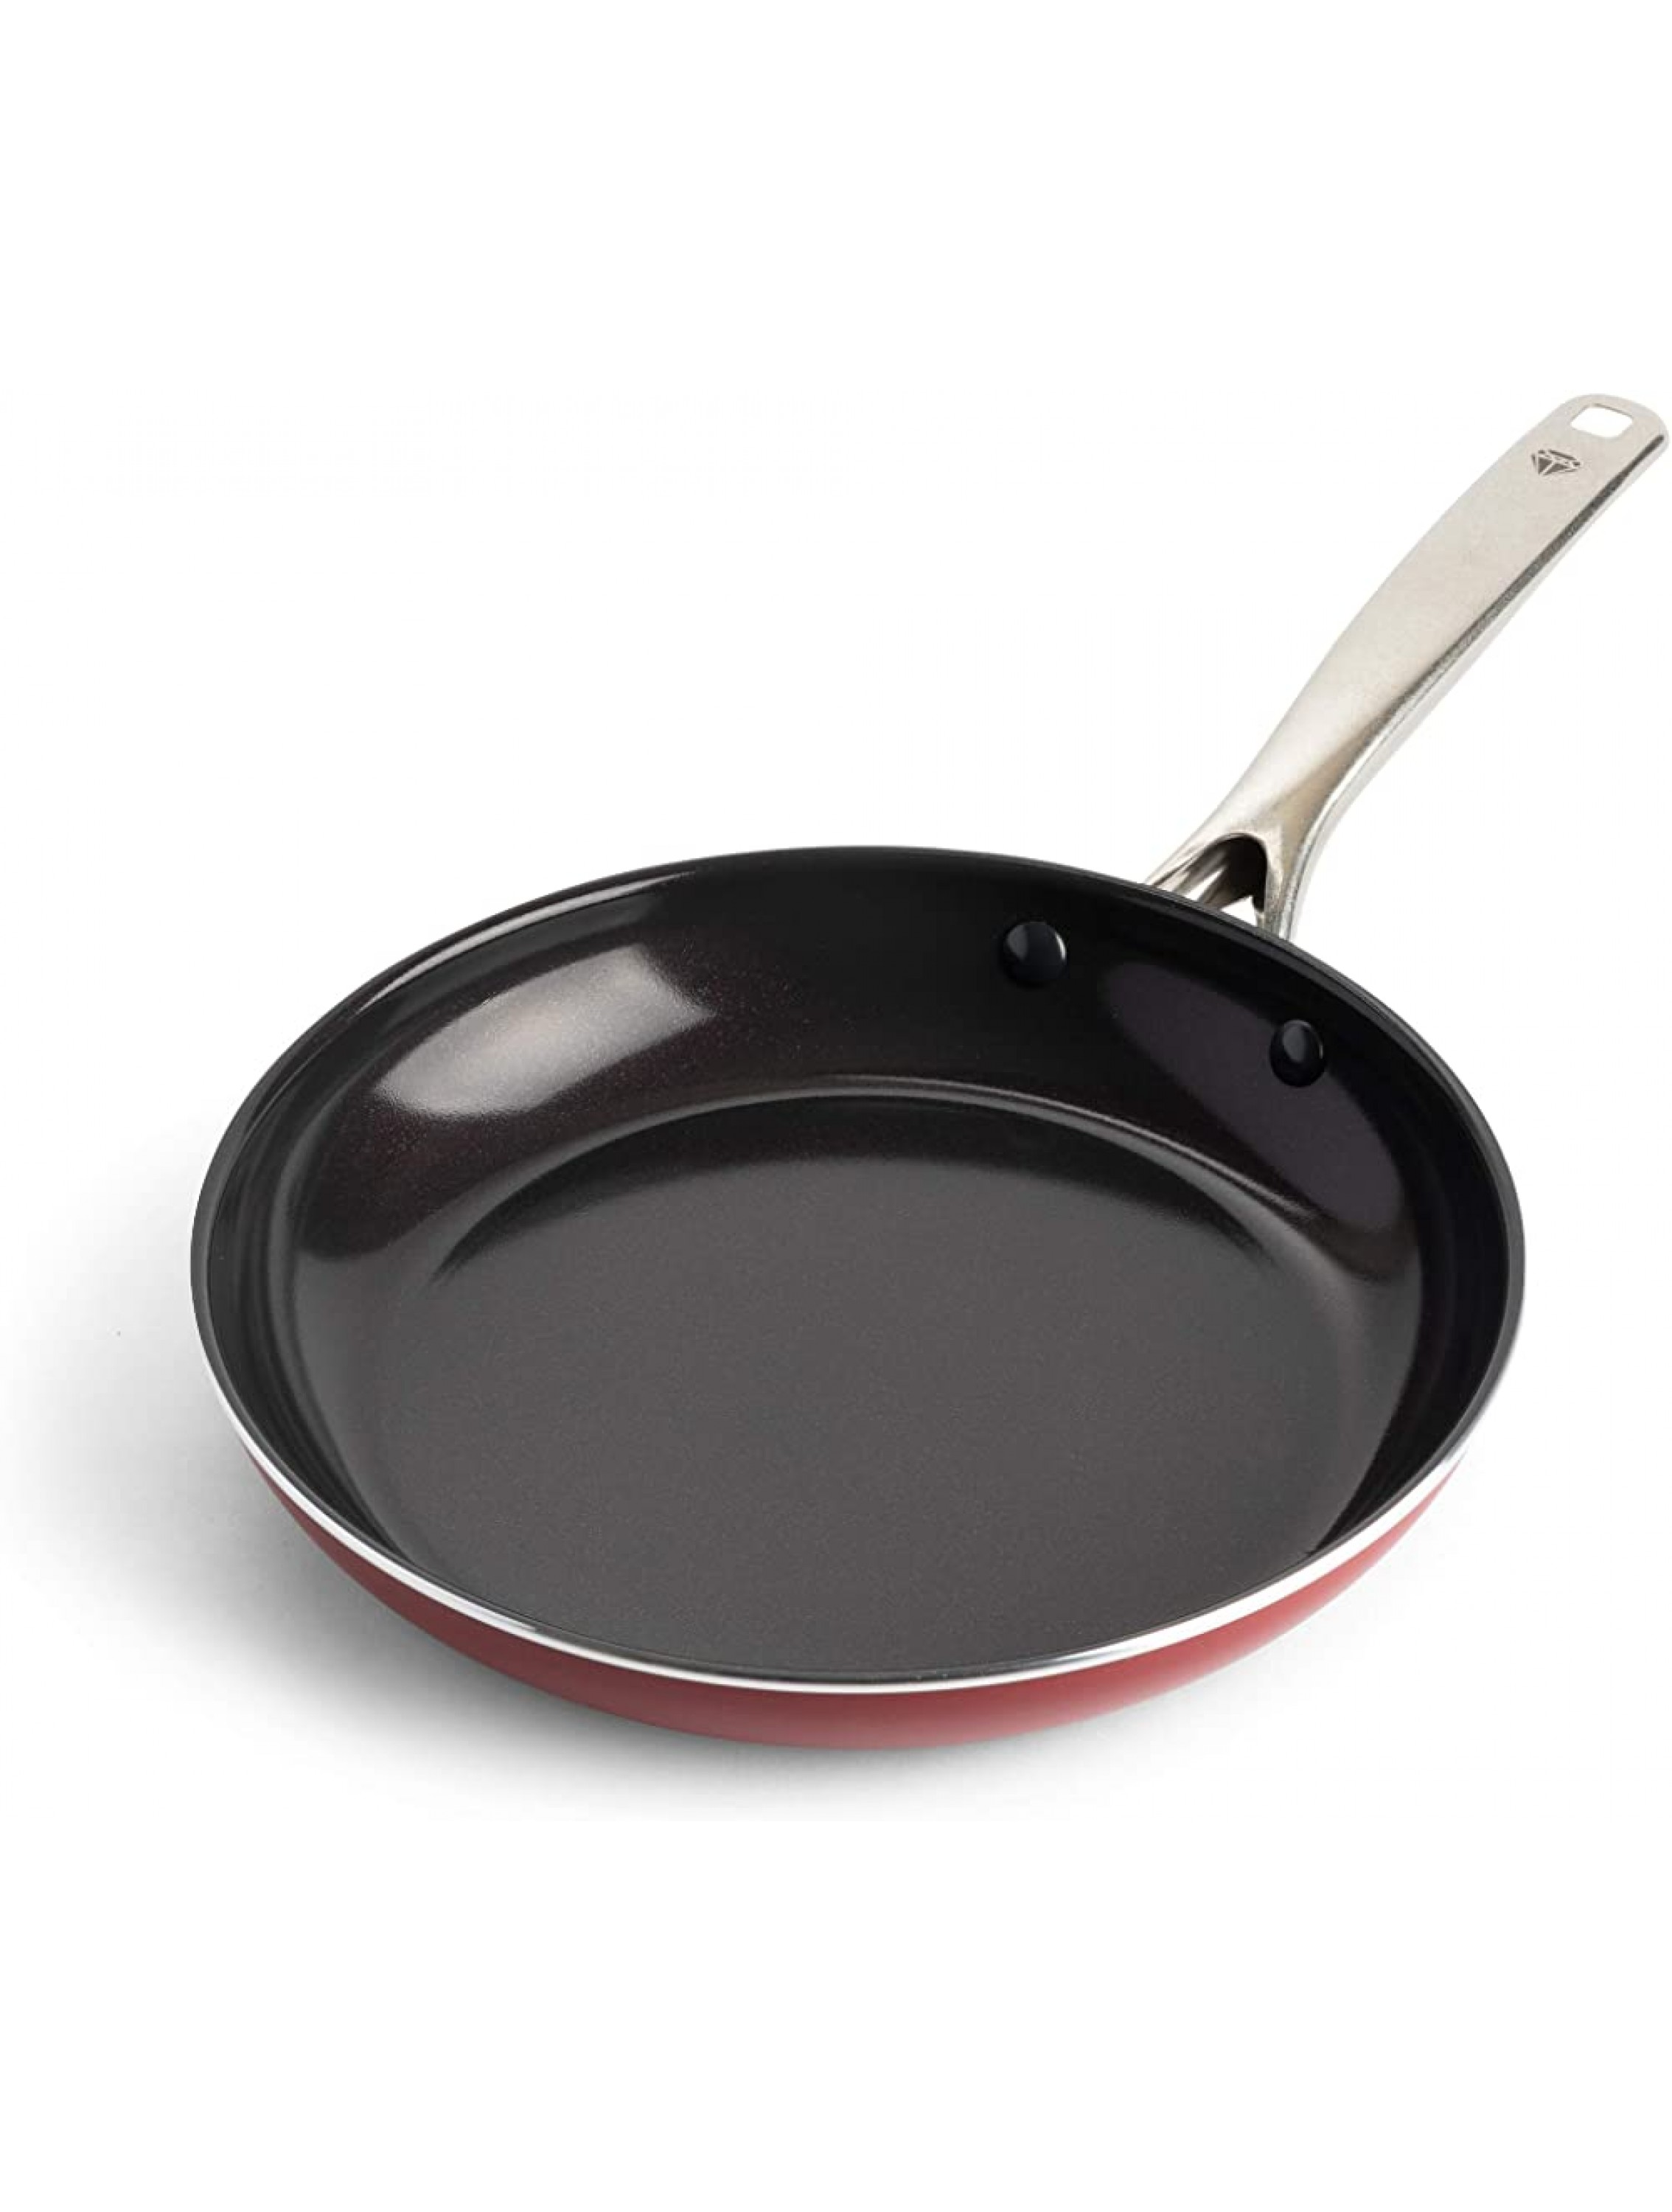 Blue Diamond Cookware Diamond Infused Ceramic Nonstick 10 Frying Pan Skillet PFAS-Free Dishwasher Safe Oven Safe Red - BRIYVYC5Y